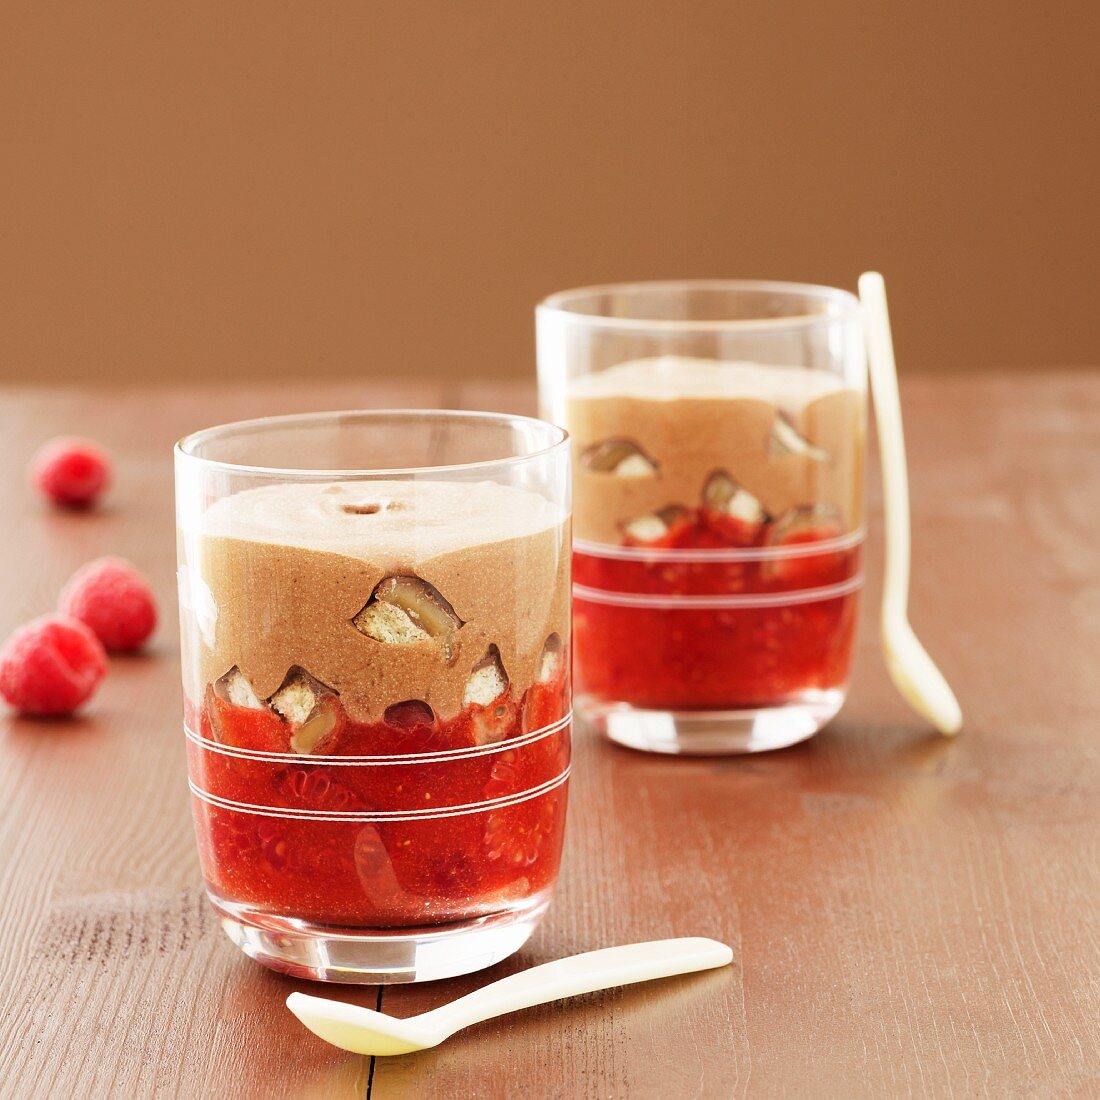 Trifle with mousse and red berries